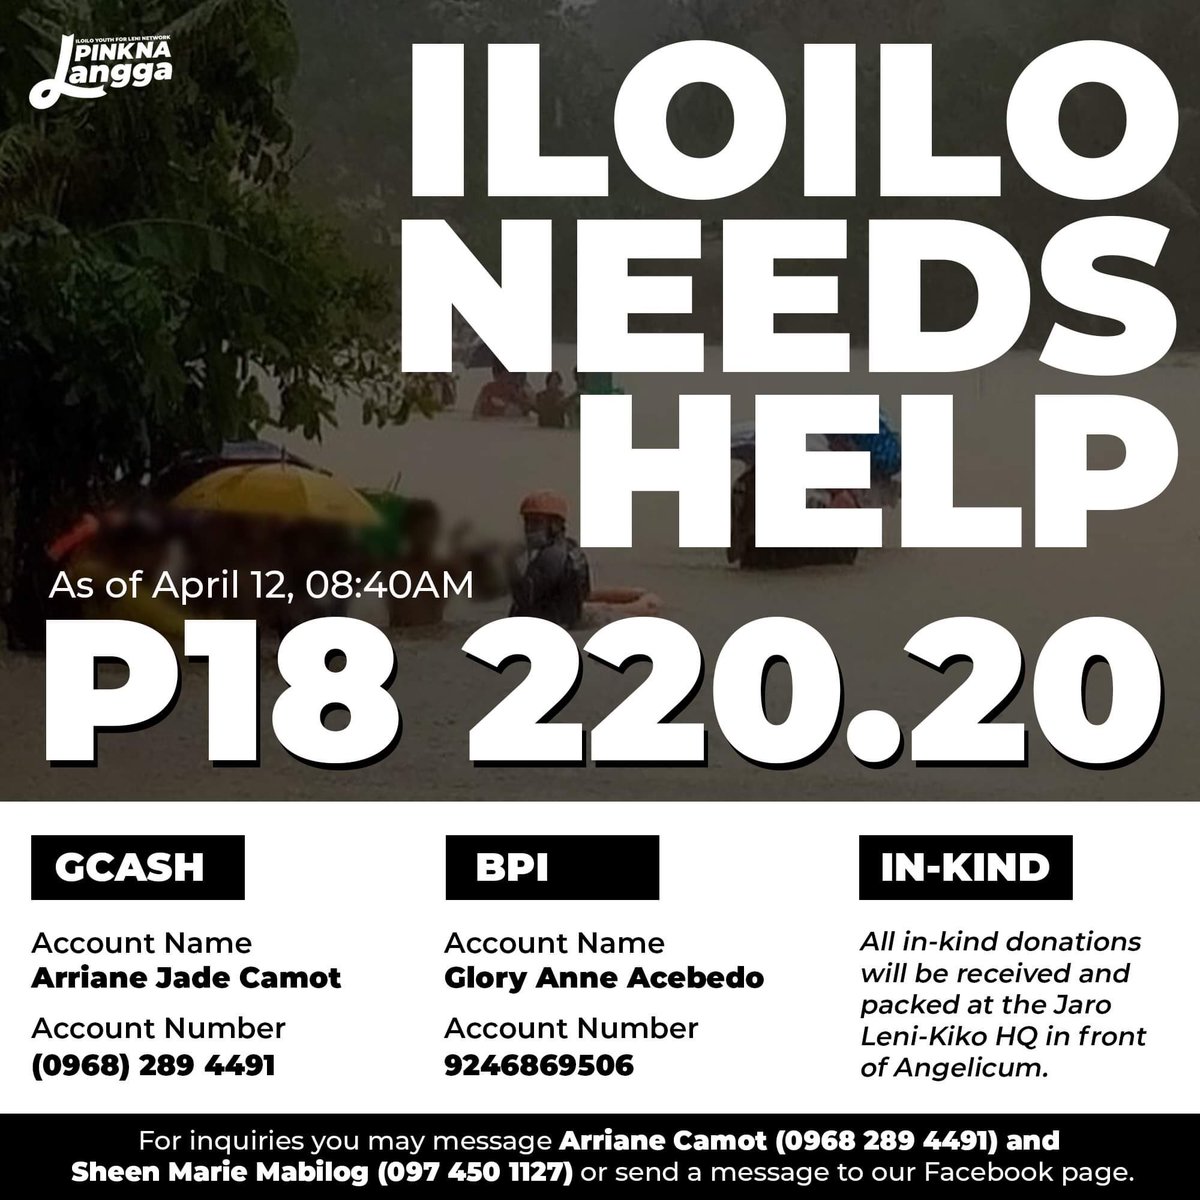 As of 8:40 AM we received overwhelming help from generous people!

Flooding continues in the northern part of Iloilo but our team already sent help to the towns of Ajuy, Lemery, Passi, etc. 

#AgatonPH  #DonatePH #ReliefPH